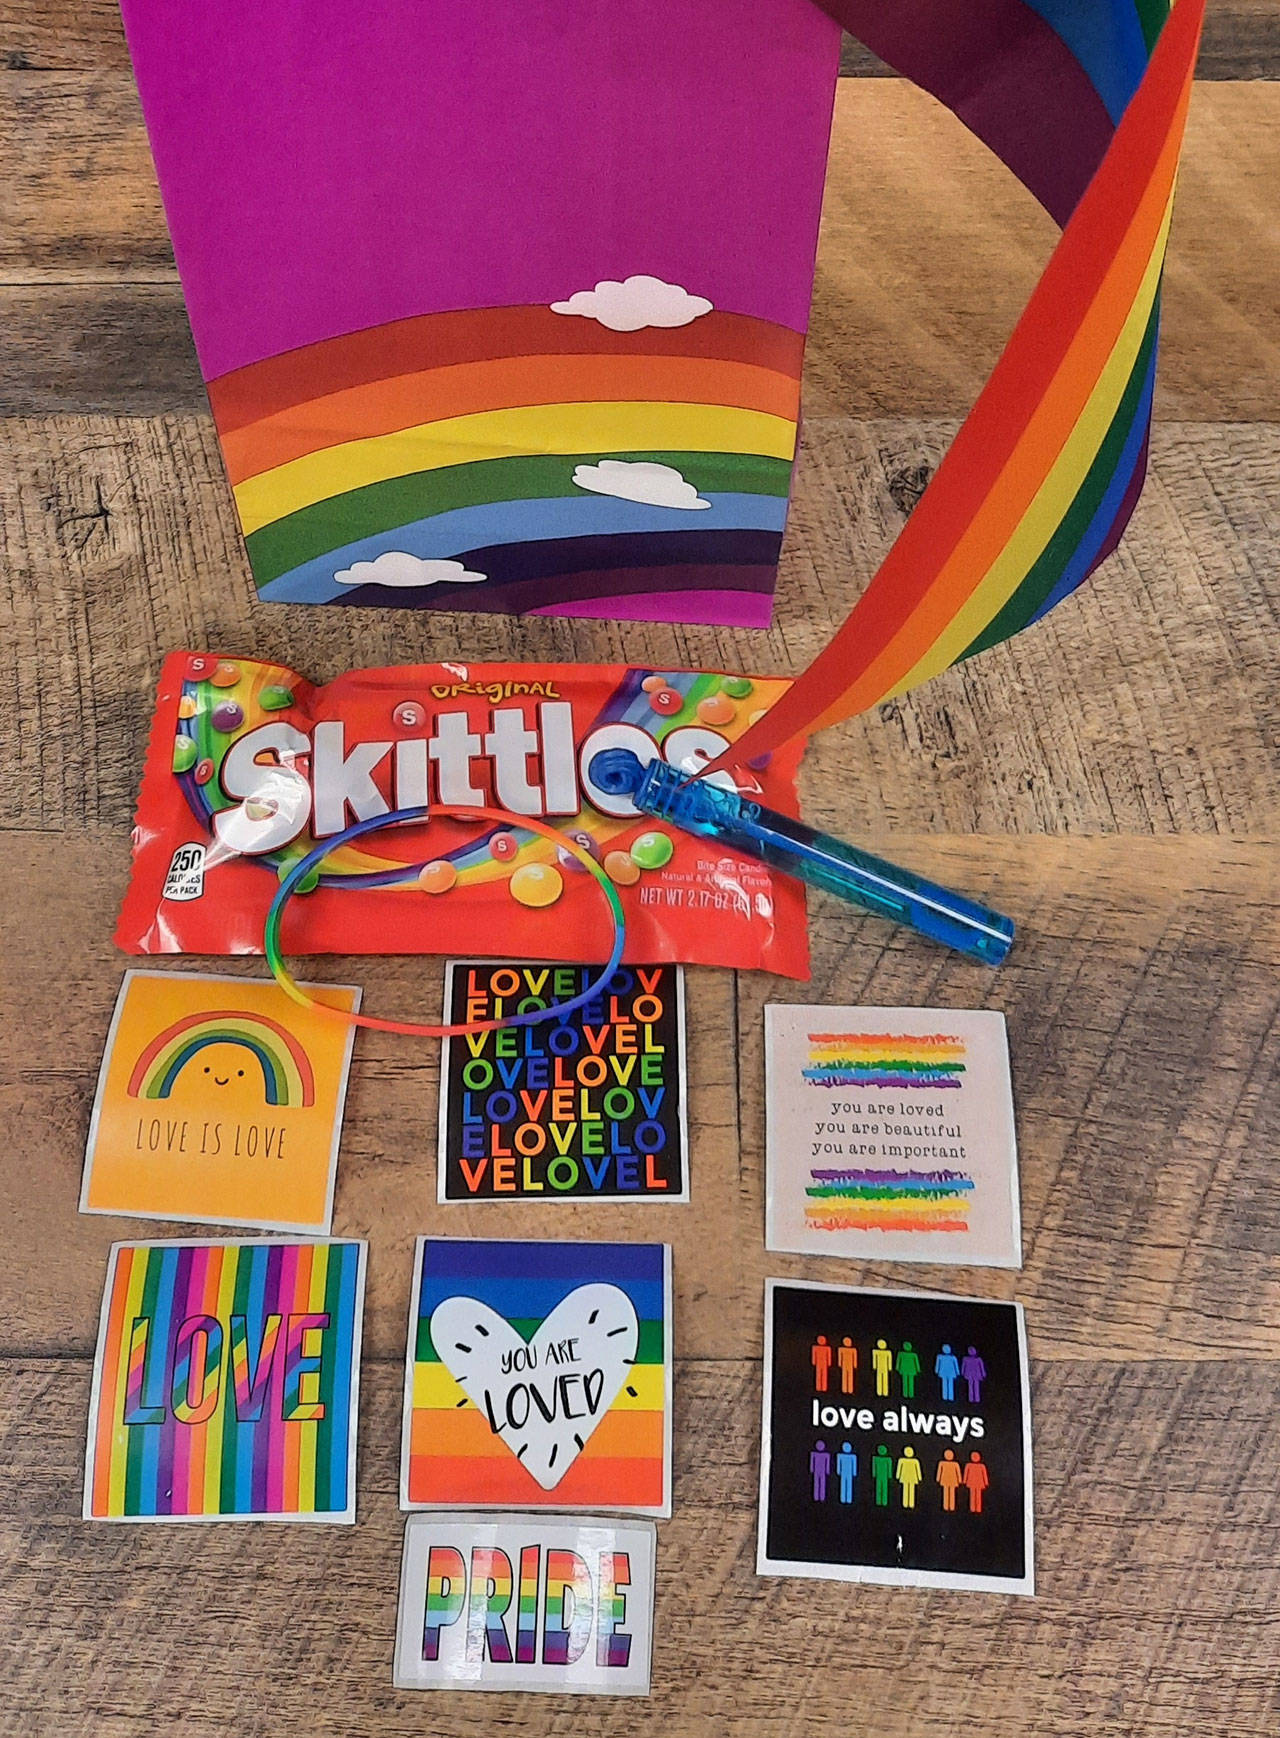 Starting June 7 and while supplies last, library patrons can celebrate Pride Month with a Pride Party Pack that includes a rainbow flag, bubbles, stickers, resources and more colorful items. Submitted photo